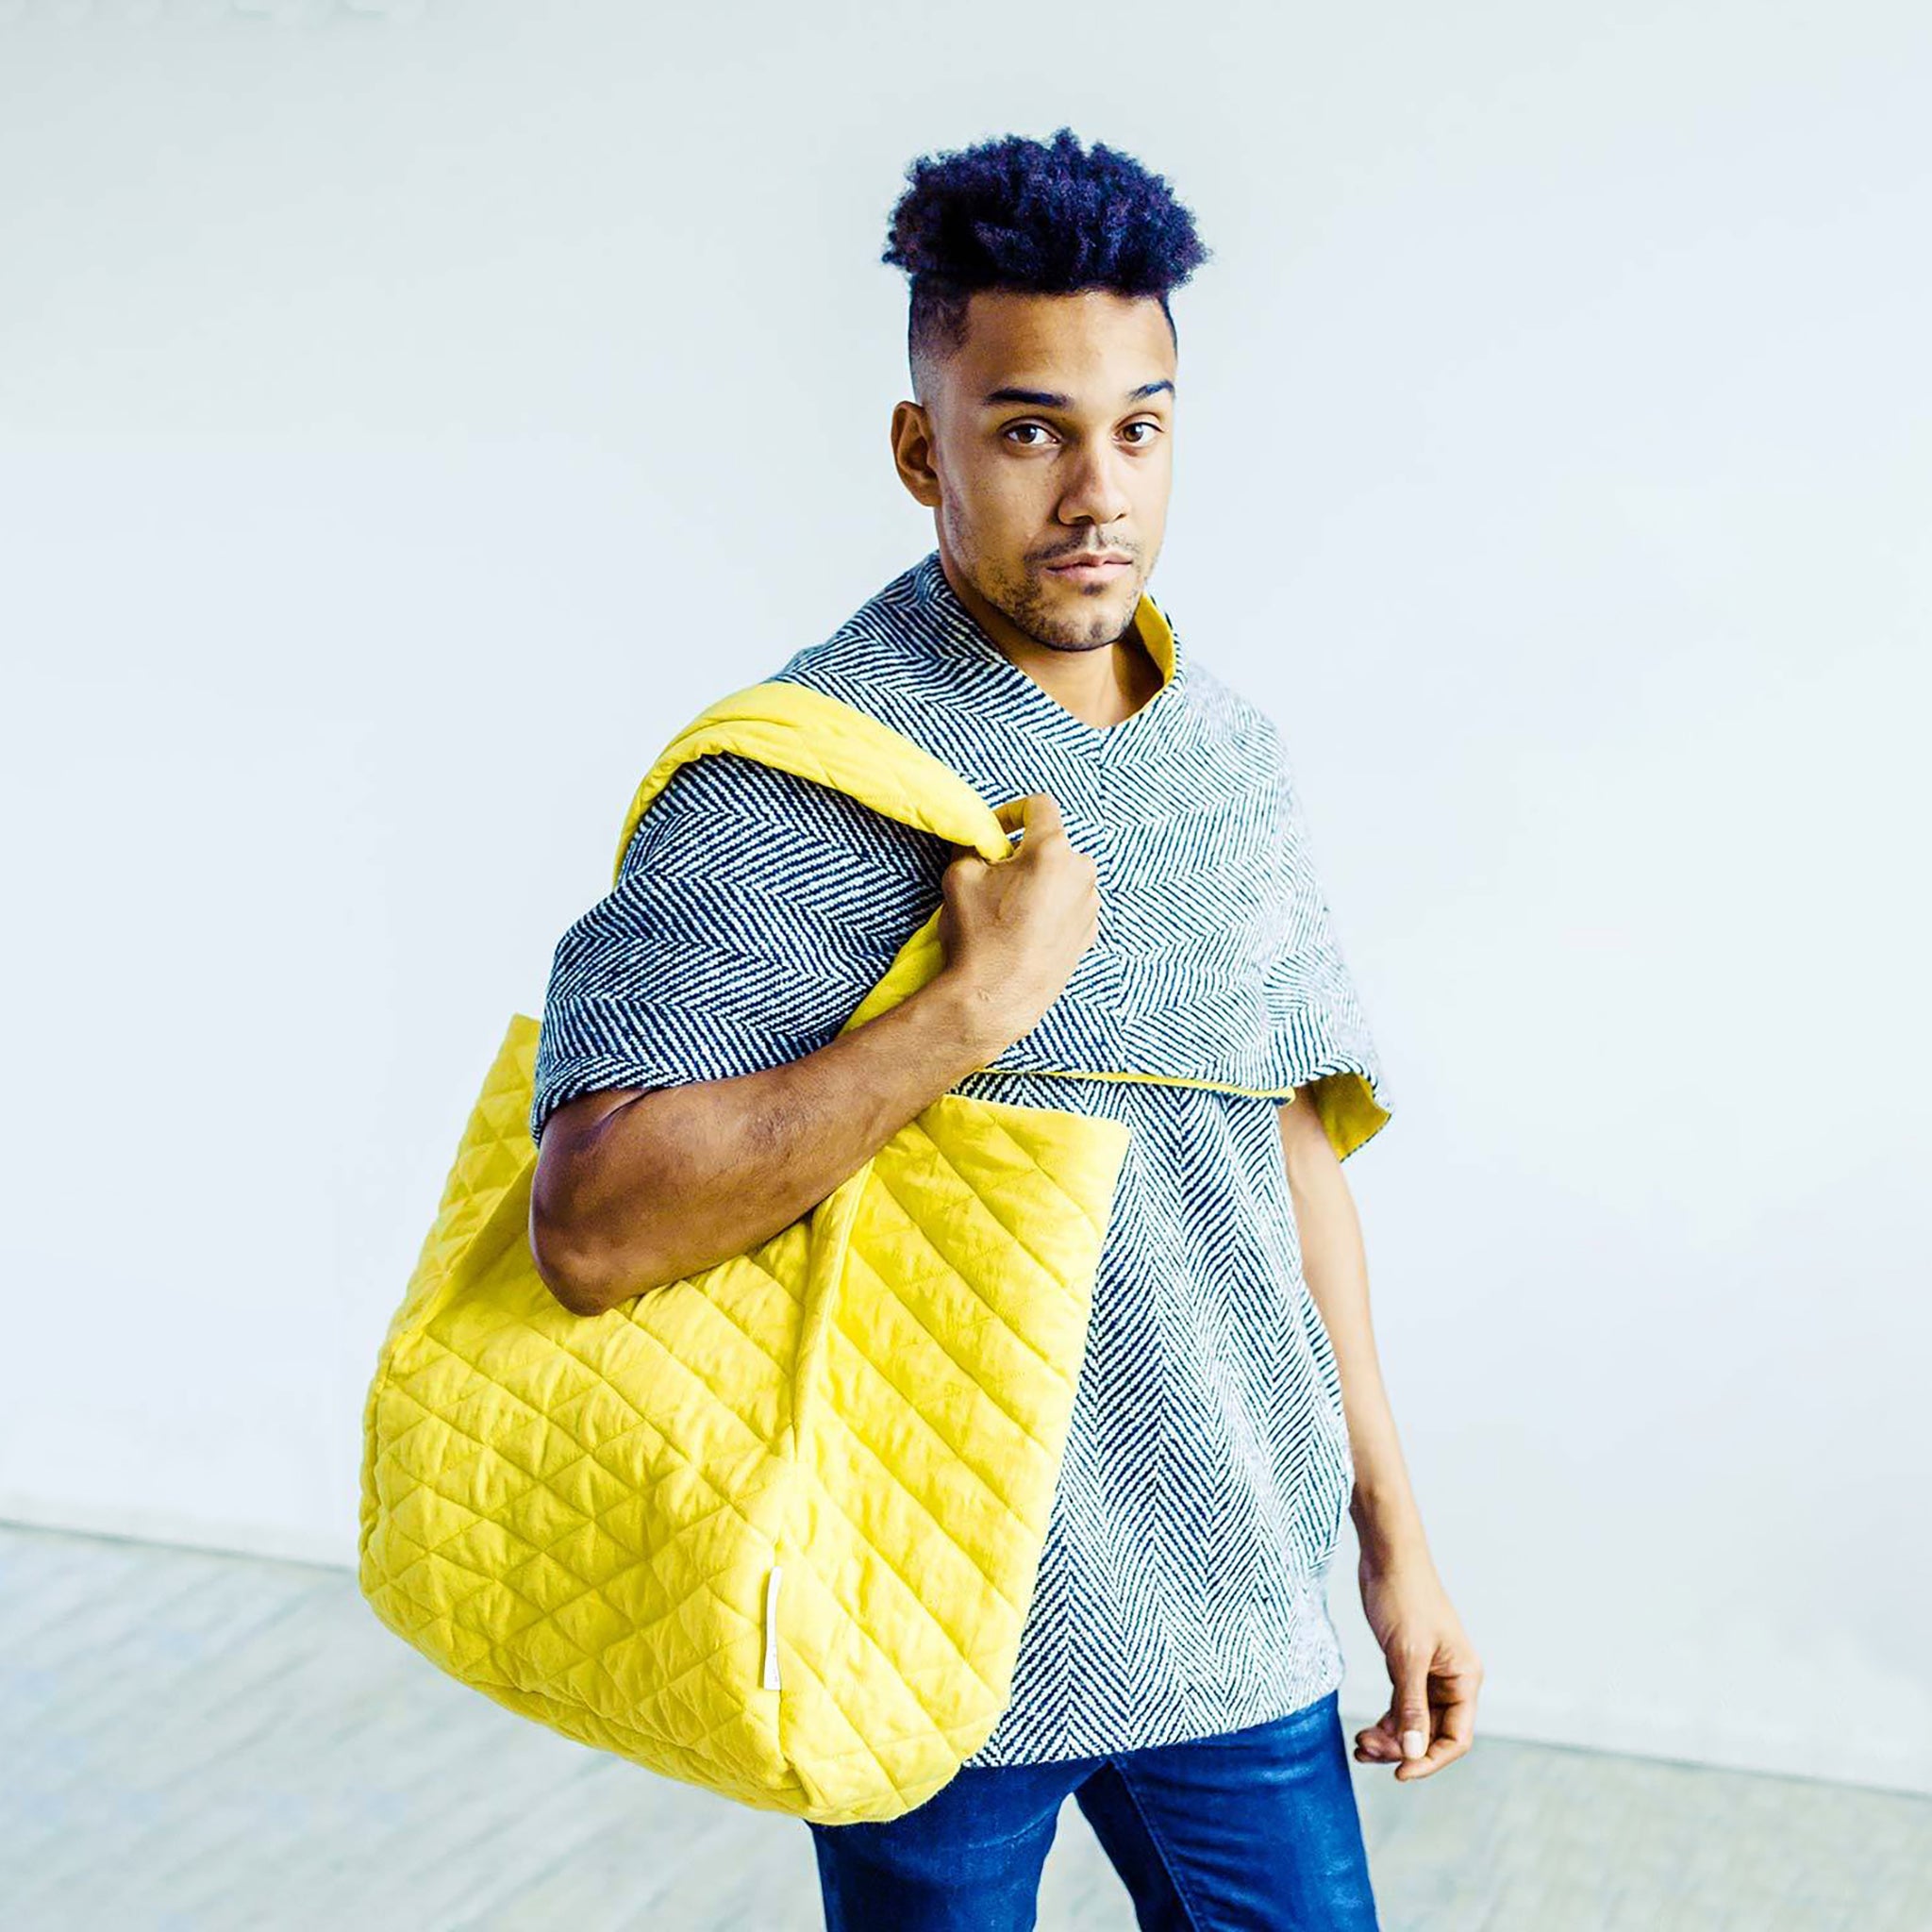 Man wearing The Costume Room Handwoven Donegal Tweed Top and yellow Linen Quilted Bag on shoulder